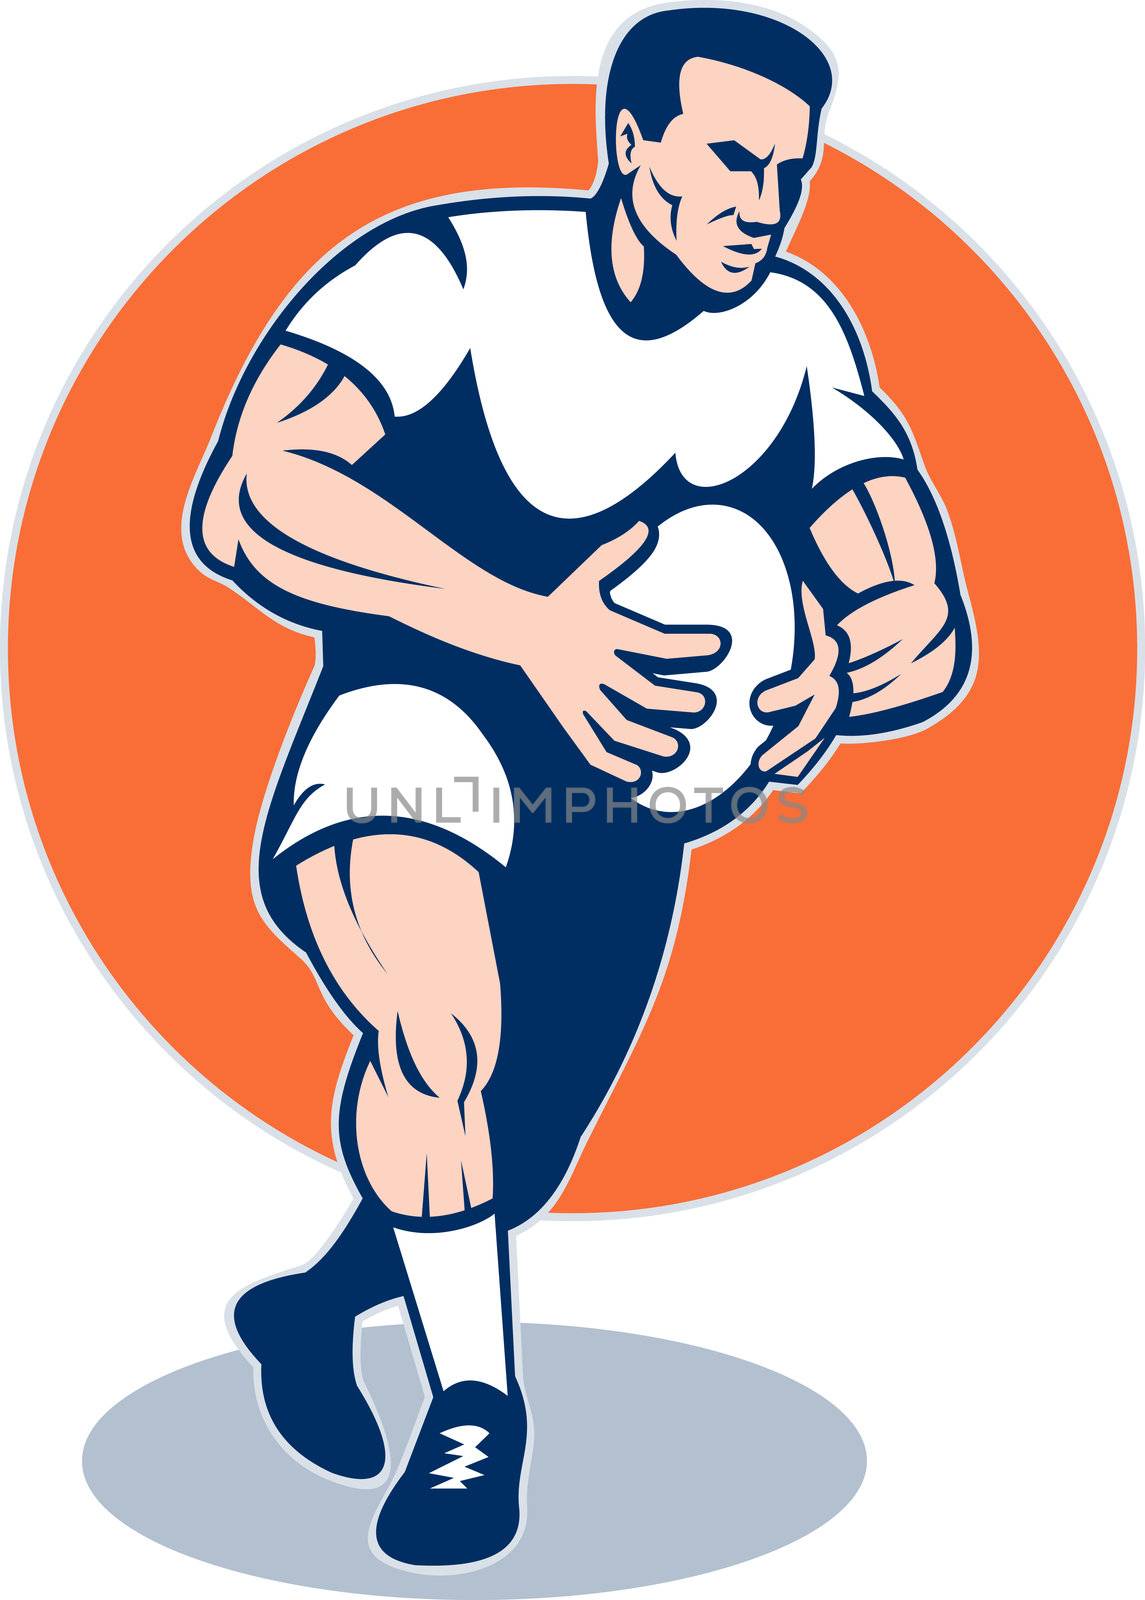 rugby player running with ball by patrimonio